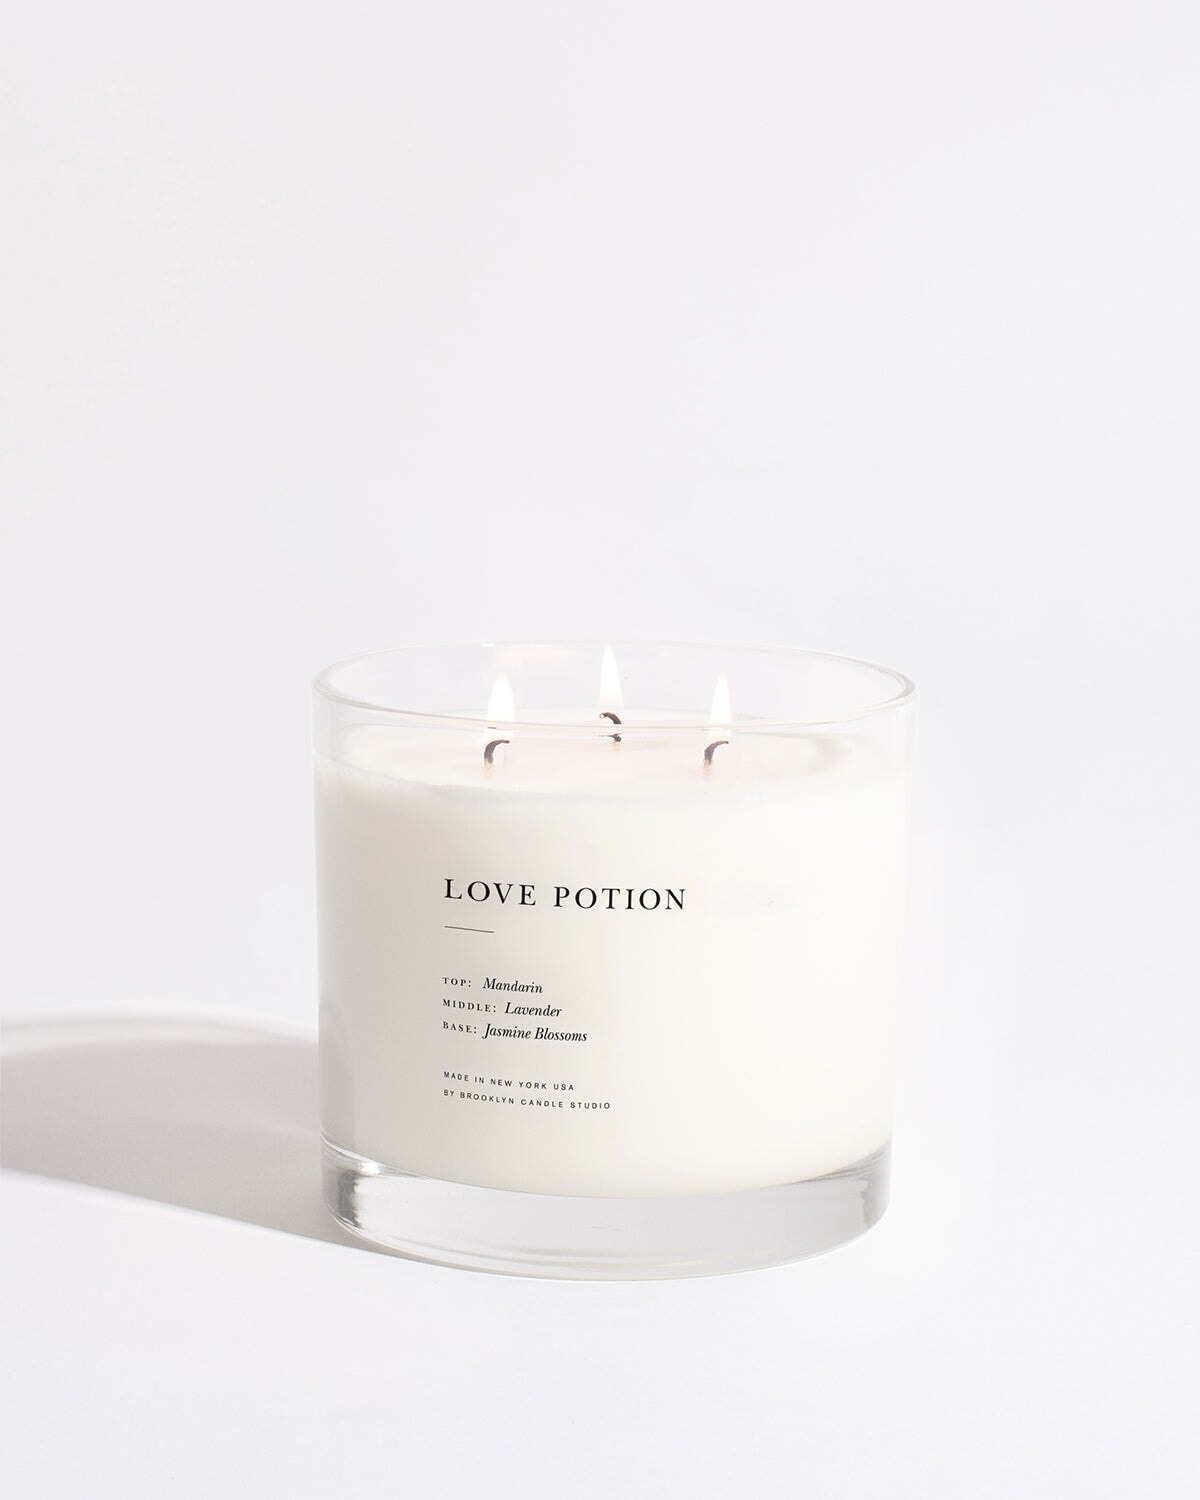 Love Potion Maximalist Candle Brooklyn Candle Studio 